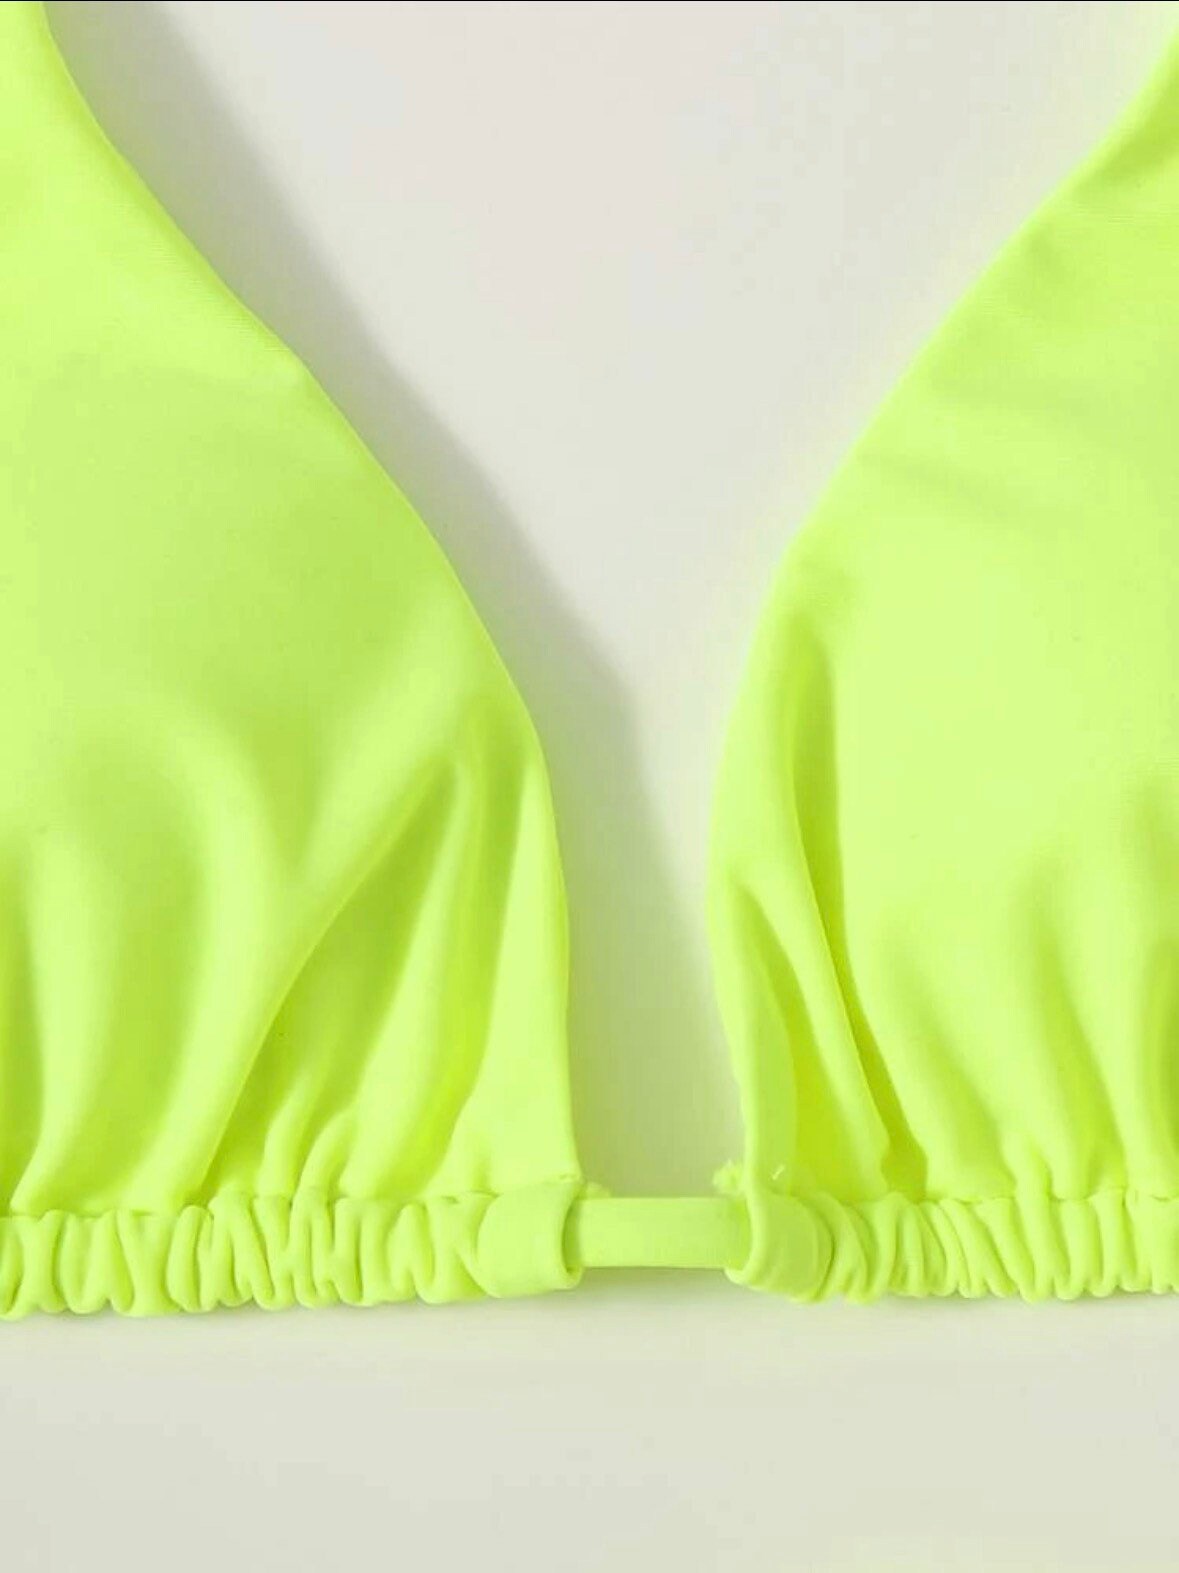 The Camille Neon Green swim bikini with beach skirt three piece set and neon green triangle halter top tie and bottoms 3 piece swimsuit set